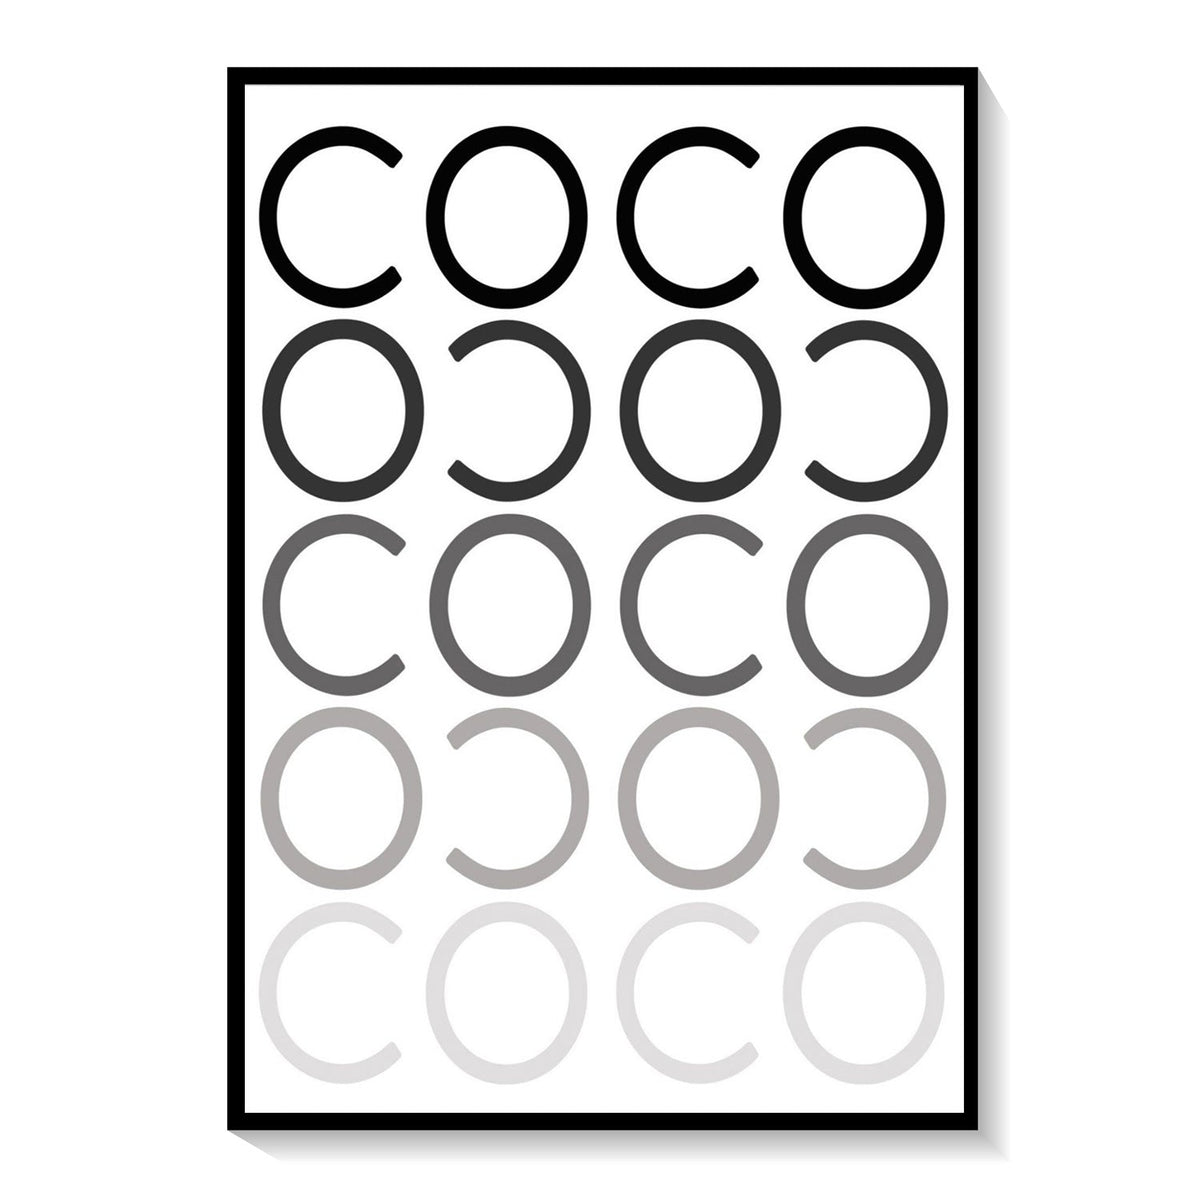 Coco Chanel Poster III: Buy Premium Framed Fashion Posters Online